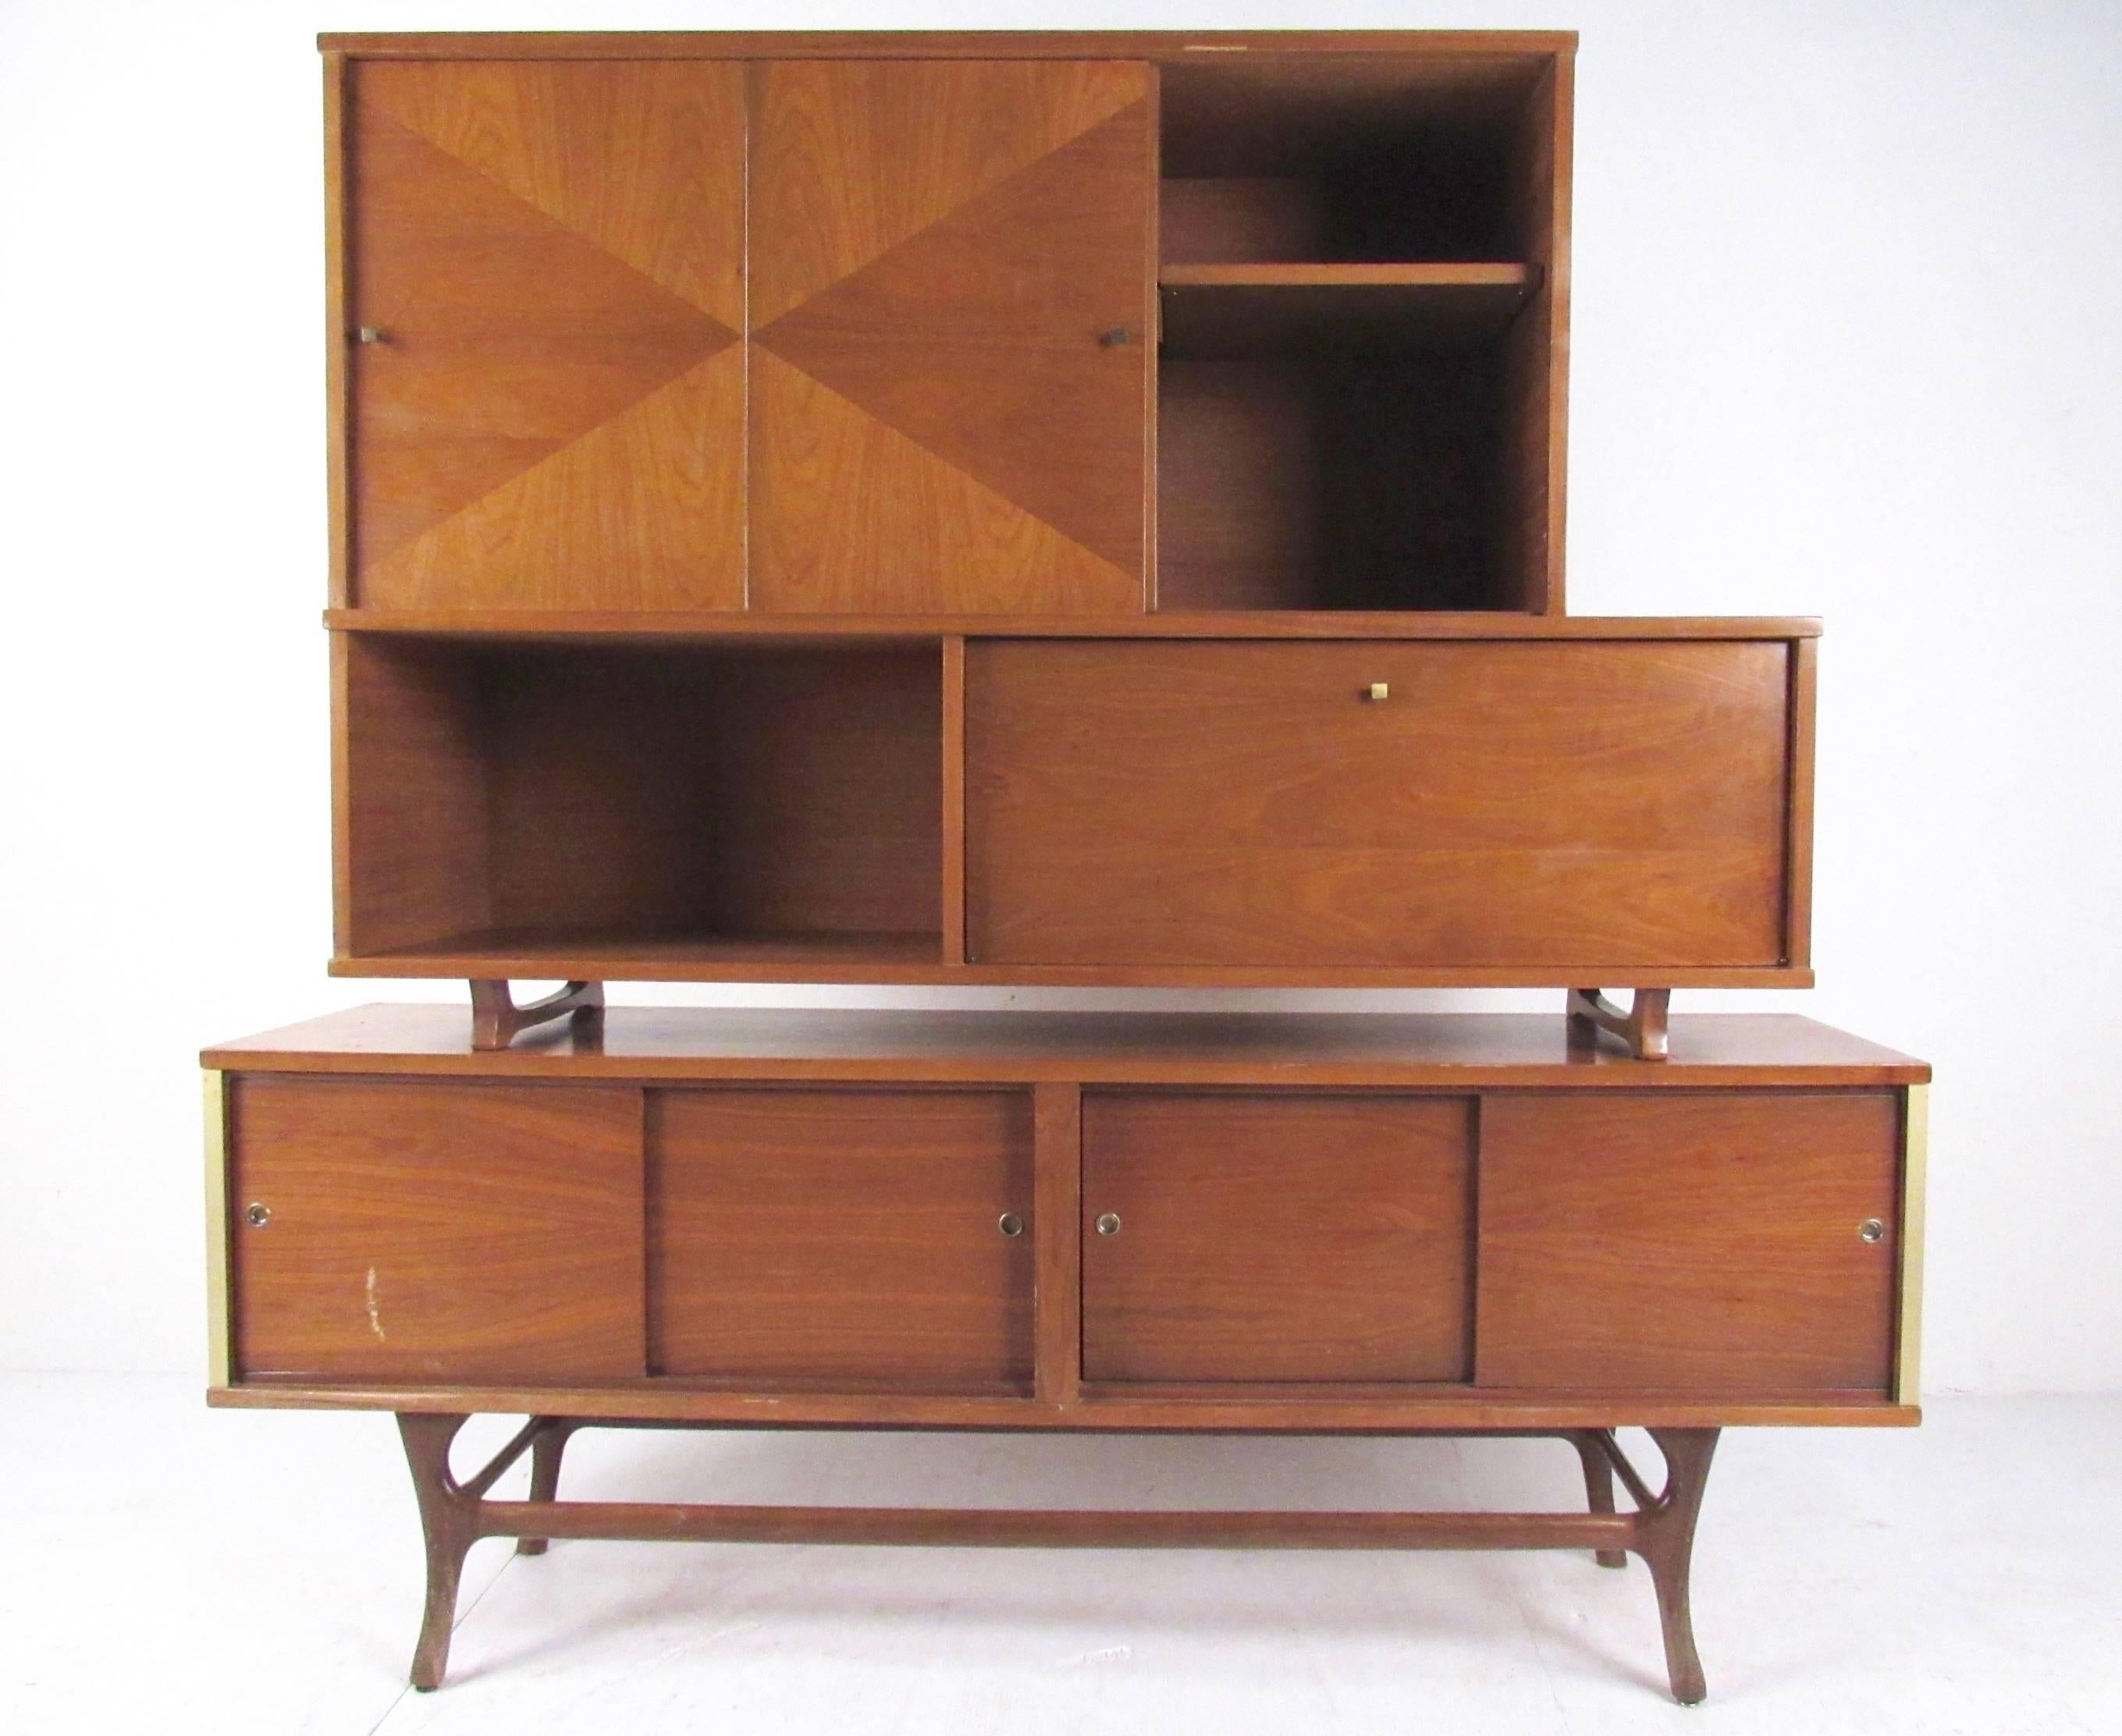 This stylish two-piece sideboard features a stylish mix of midcentury design details to make an impressive modern addition to home or office decor. Spacious shelved storage, sliding door access, and shapely hardwood legs add to the vintage appeal.